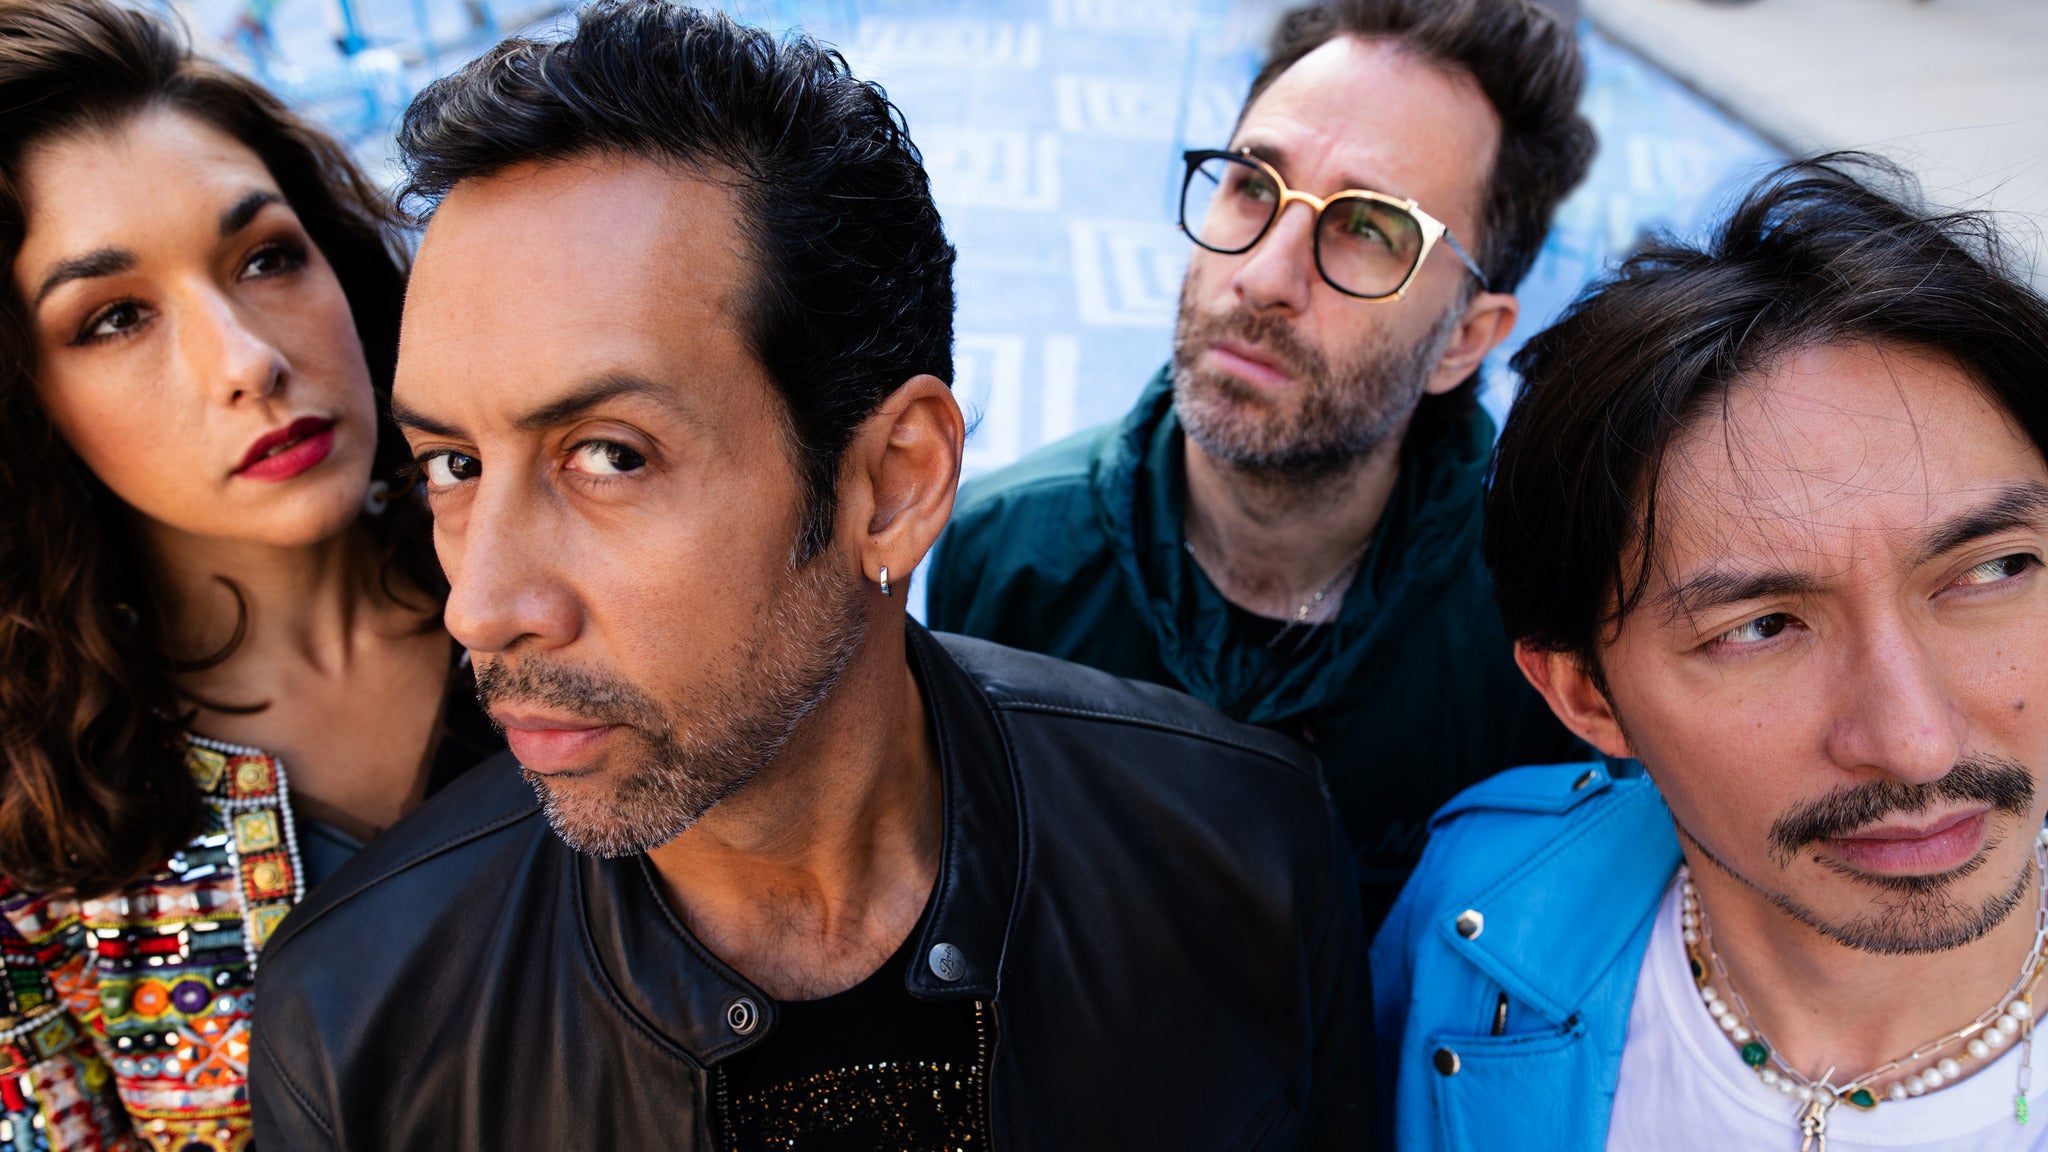 Antonio Sanchez & Bad Hombre in Portsmouth promo photo for Inner Circle presale offer code